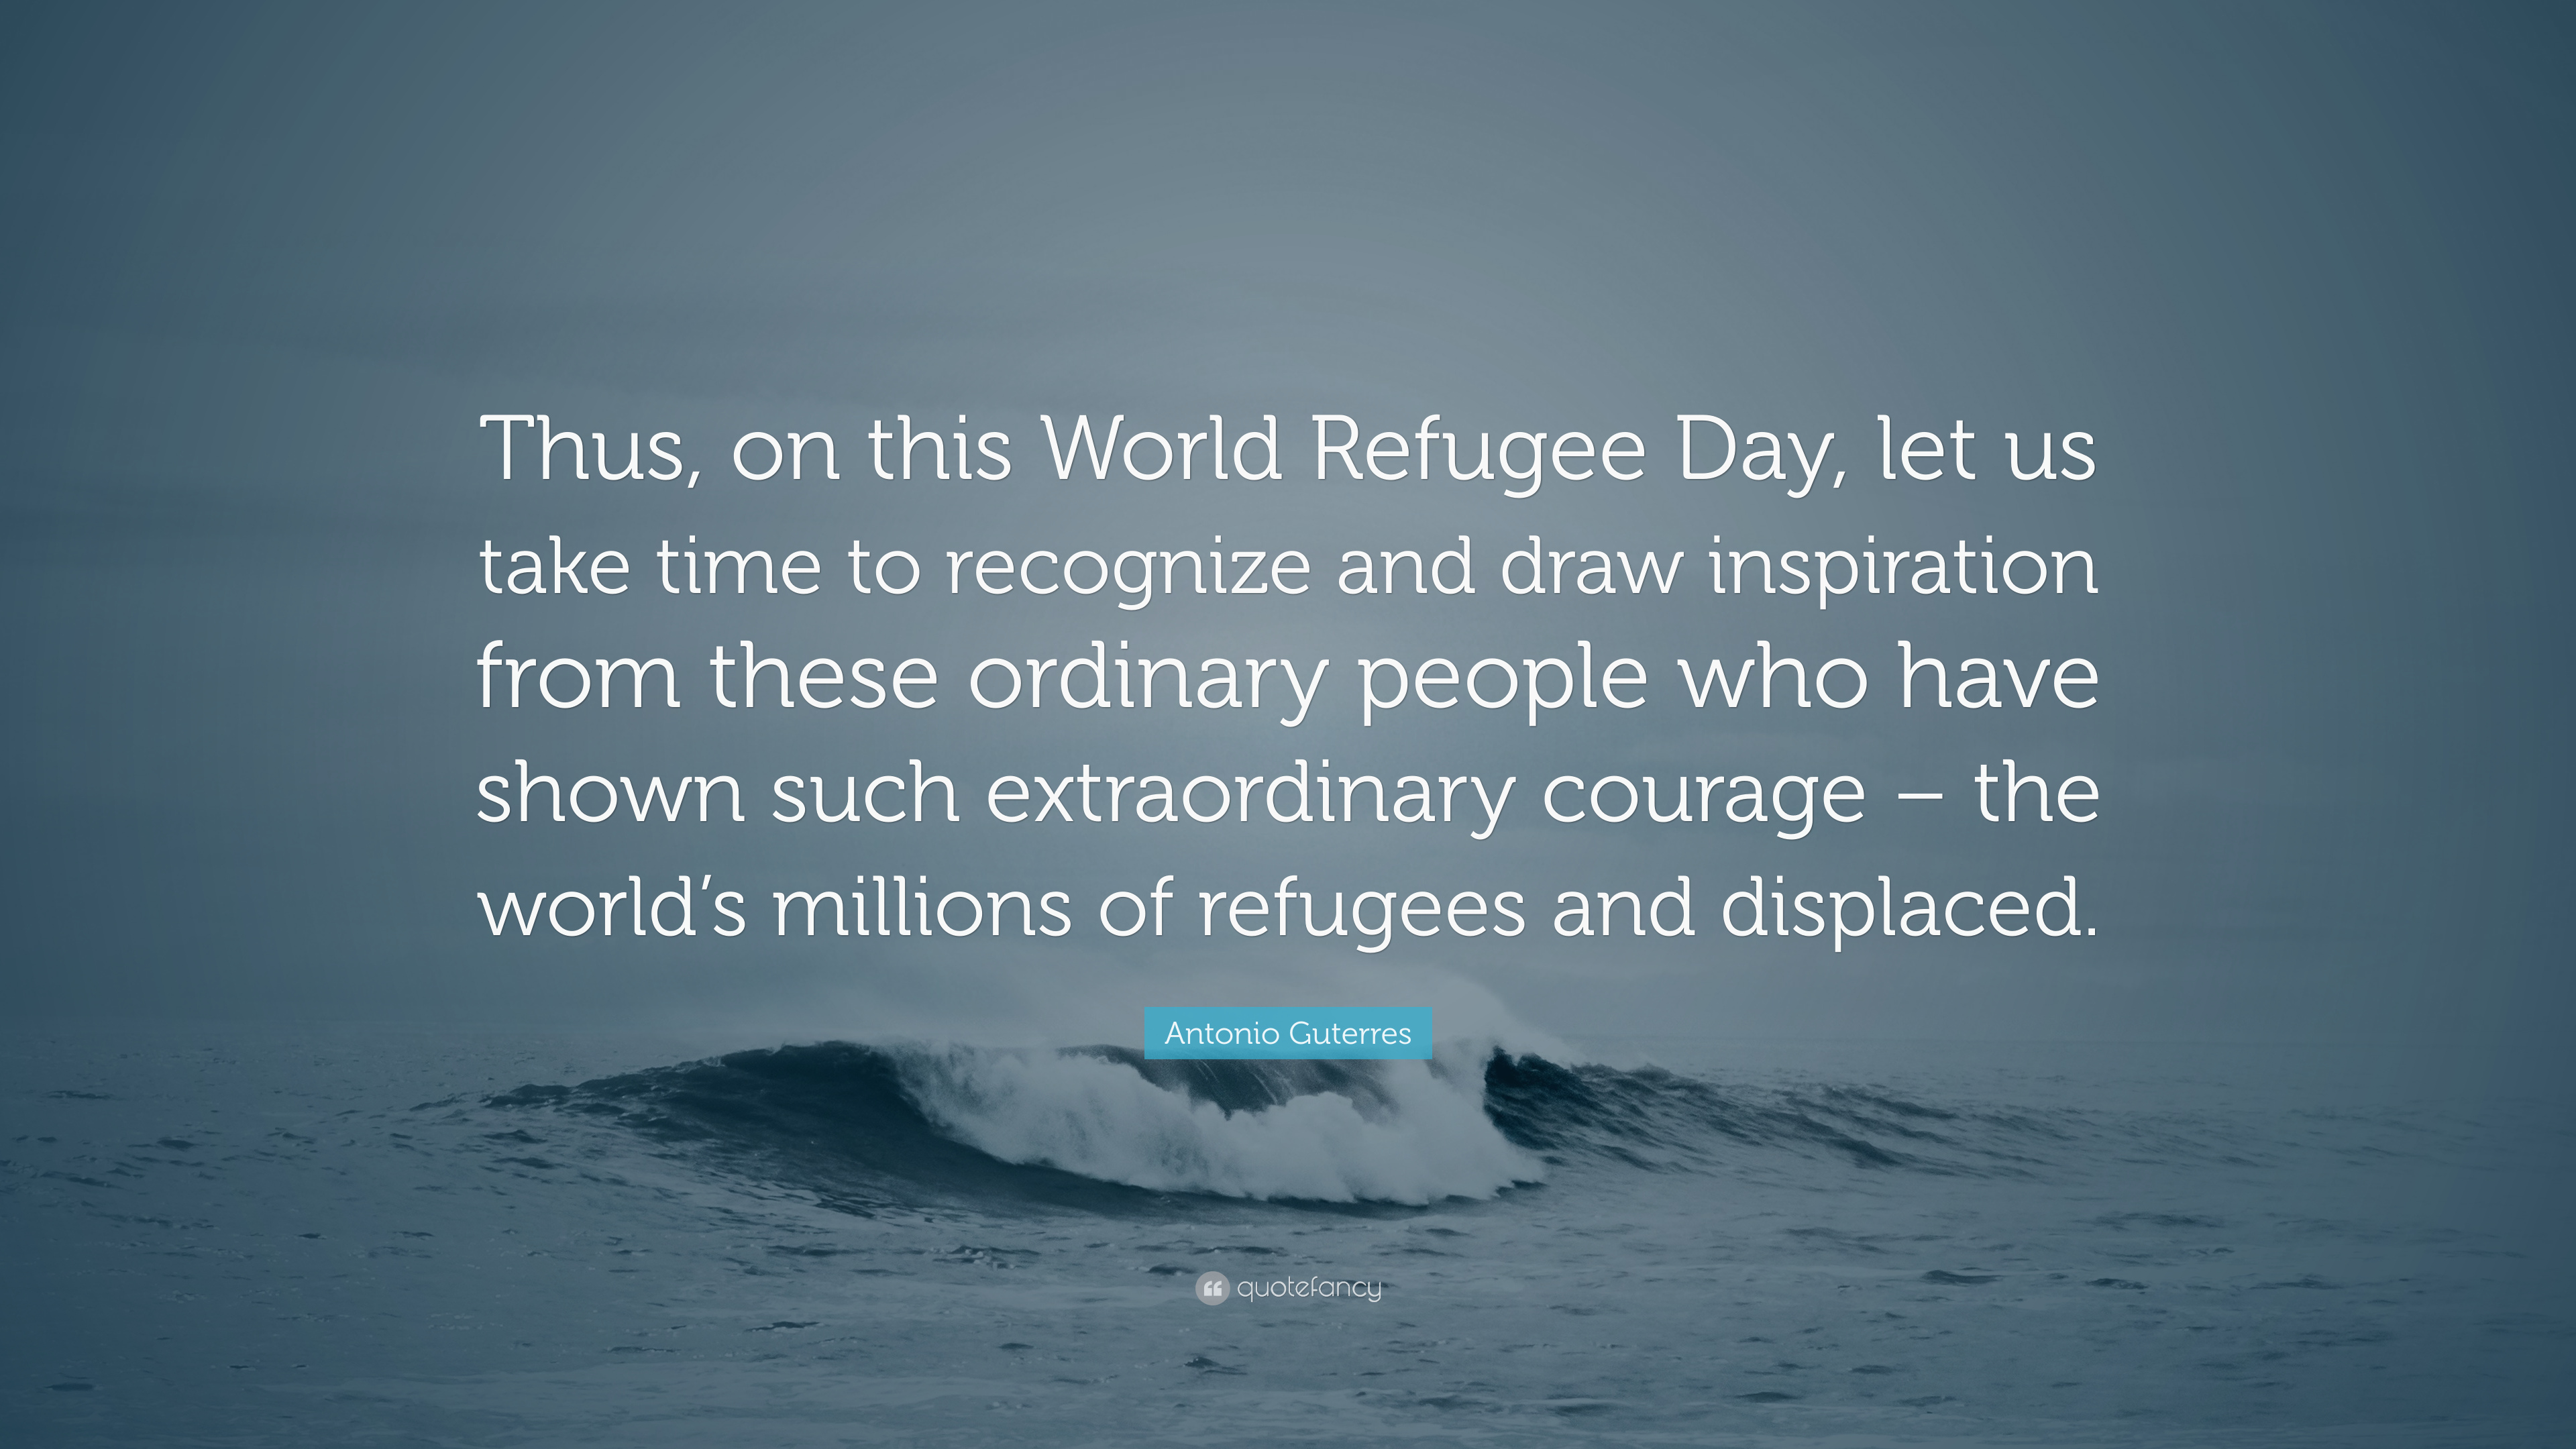 Antonio Guterres Quote: “Thus, on this World Refugee Day, let us take time to recognize and draw inspiration from these ordinary people who have .”